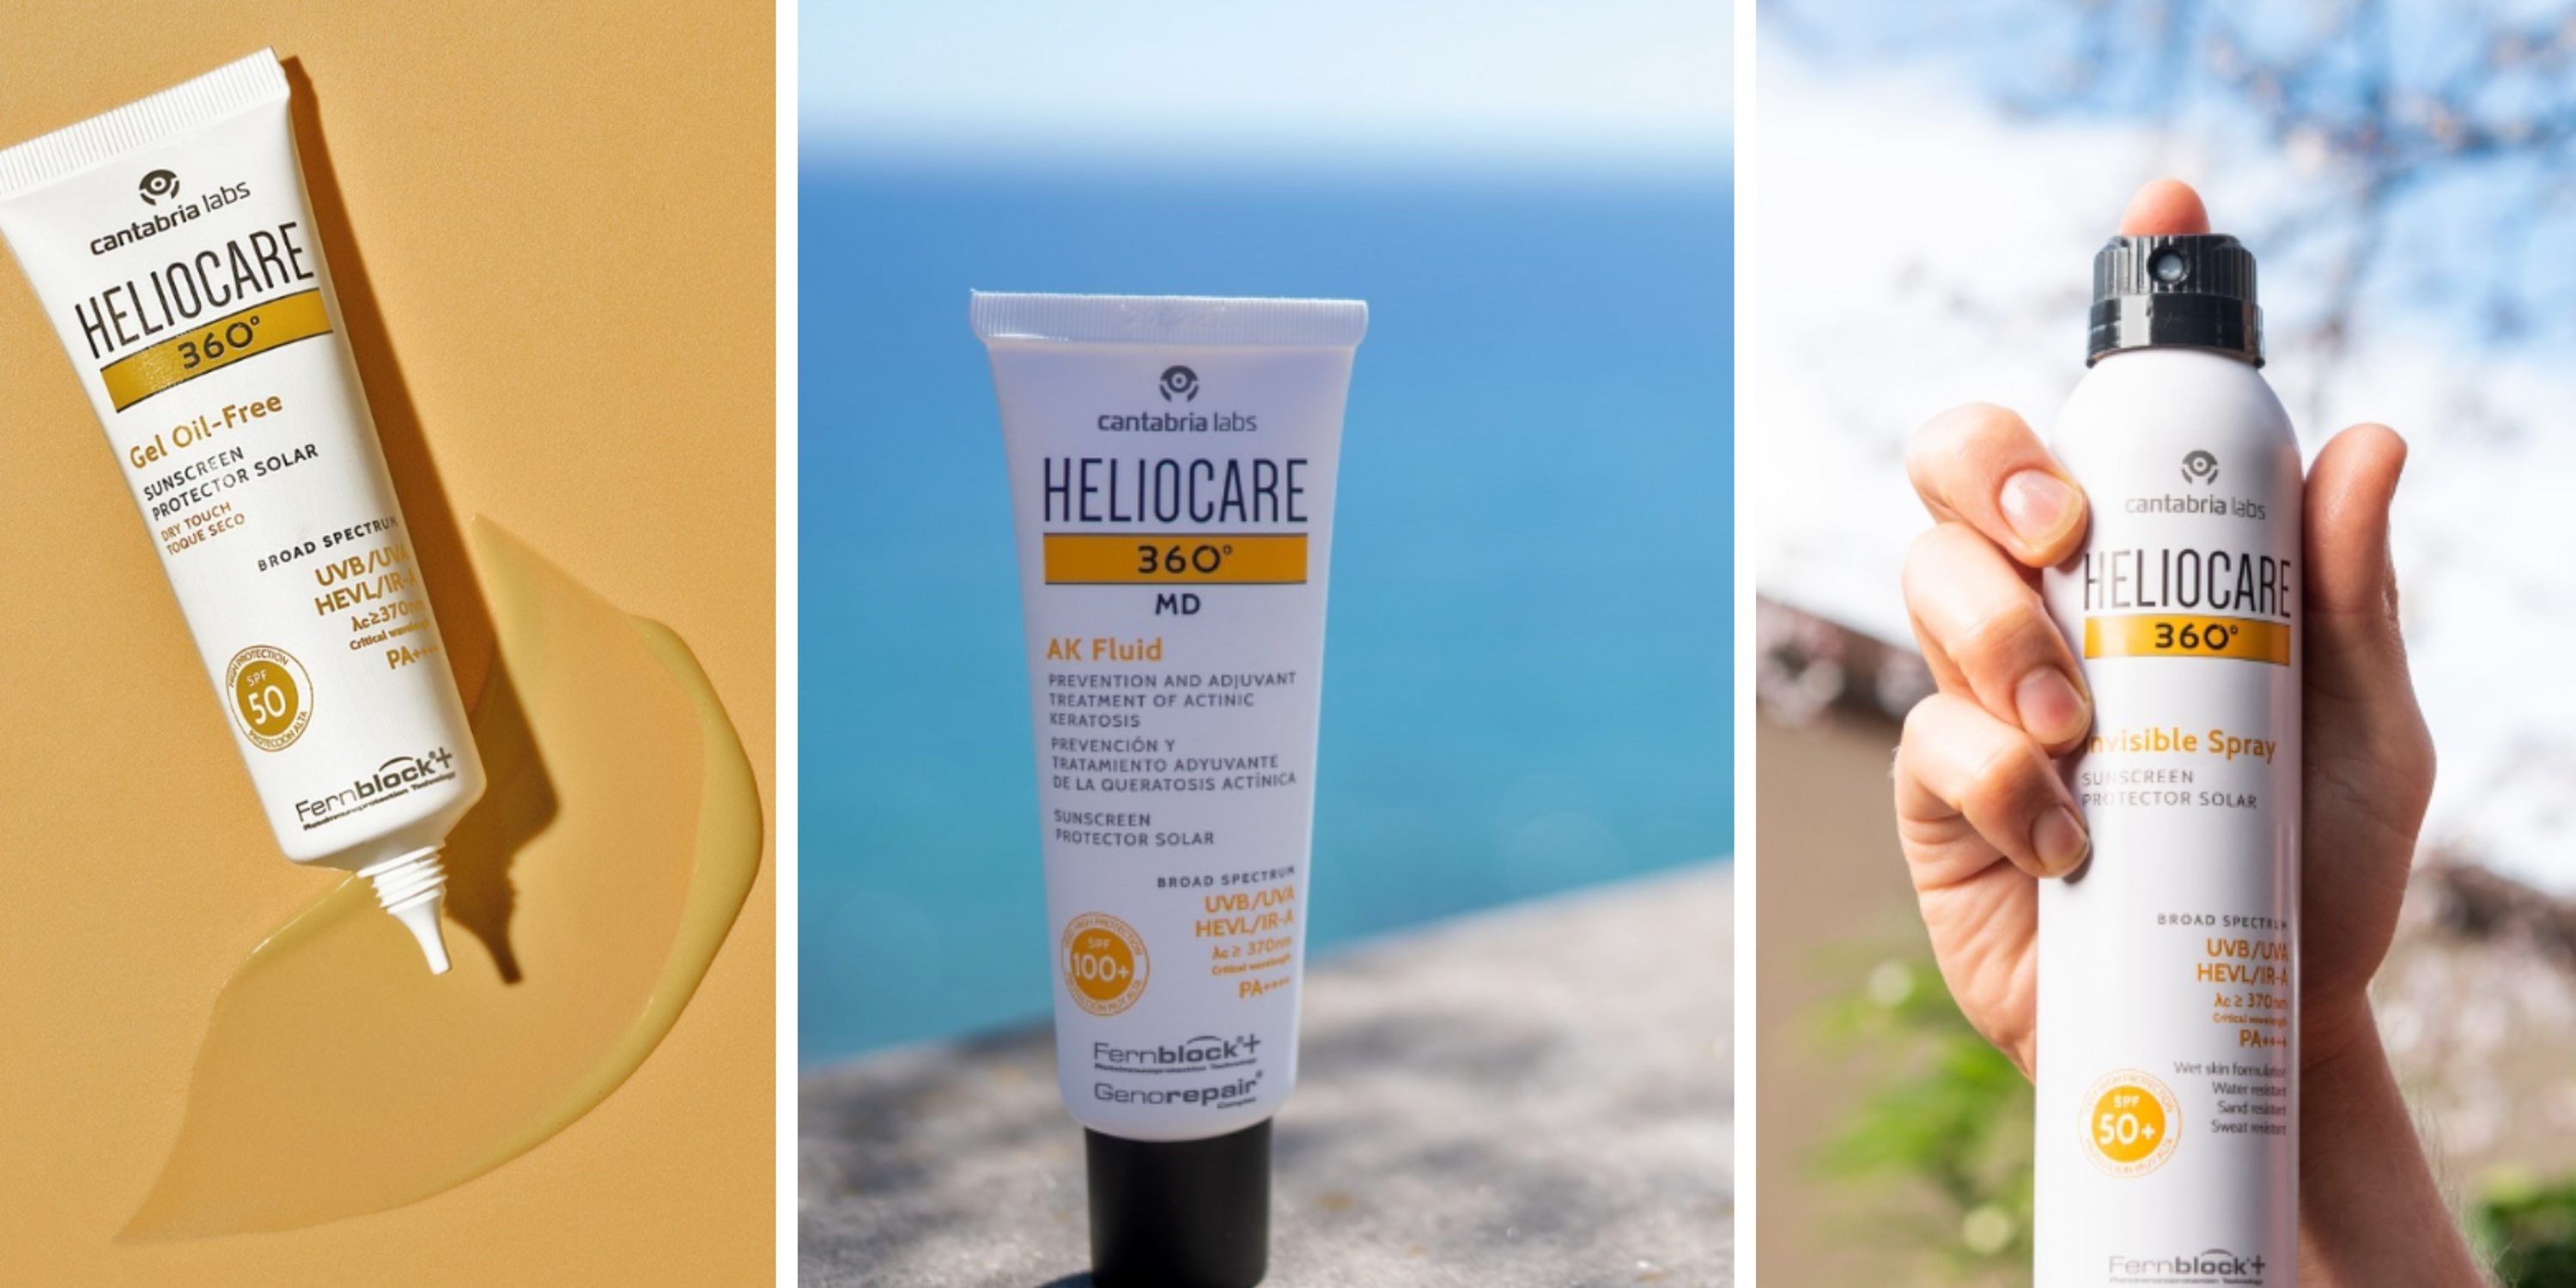 Heliocare: Is It Worth the Hype?